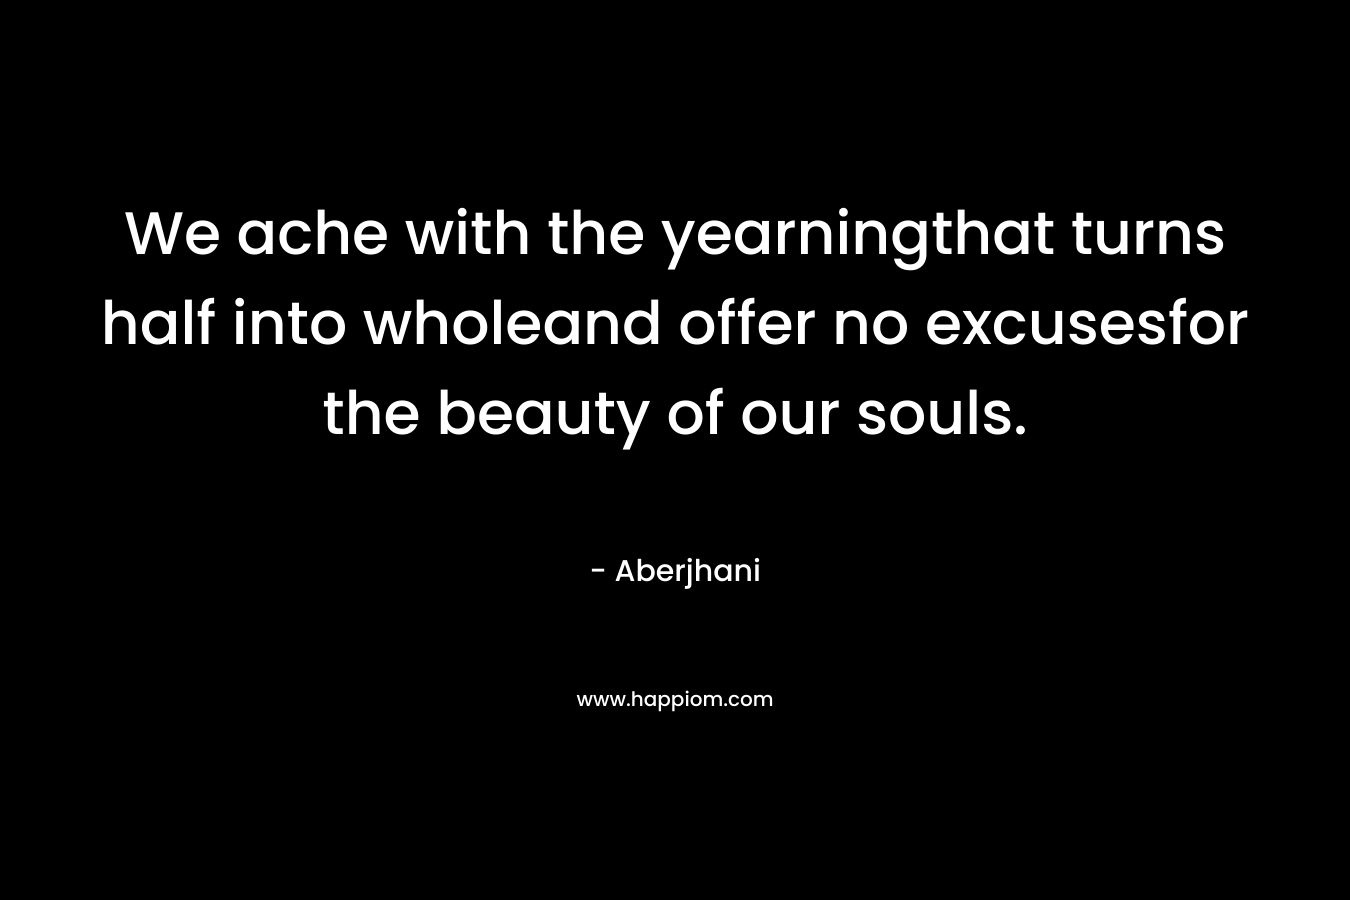 We ache with the yearningthat turns half into wholeand offer no excusesfor the beauty of our souls. – Aberjhani